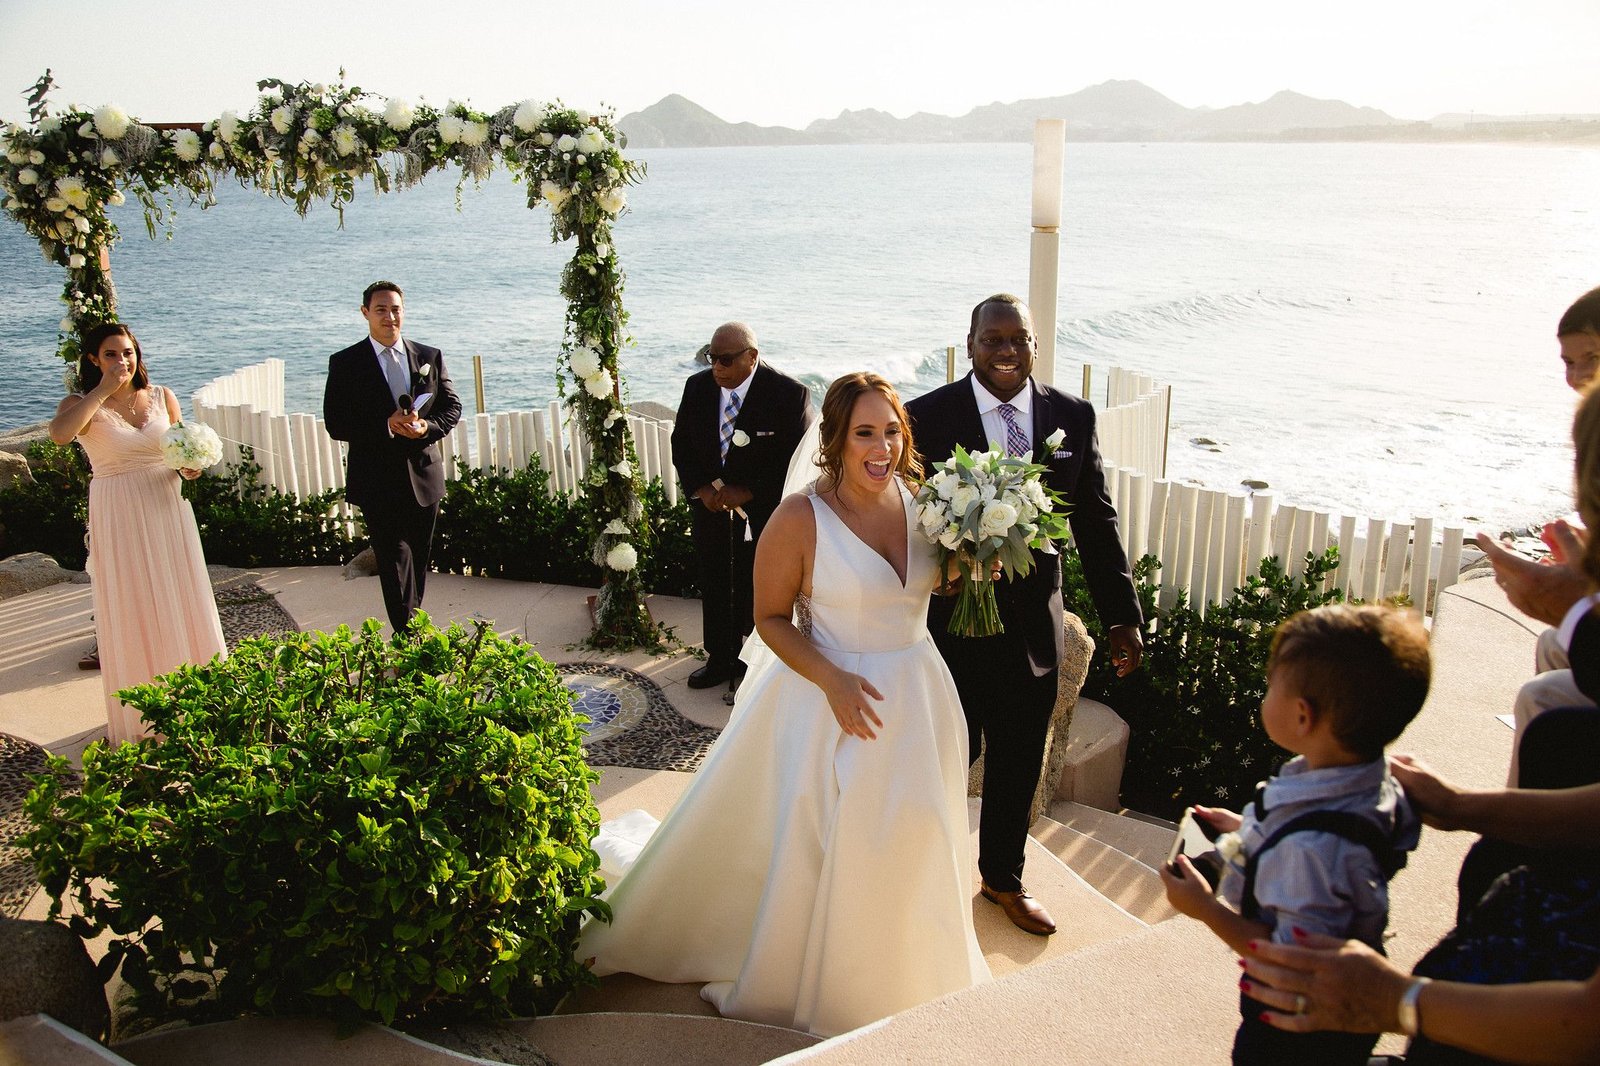 Bride and groom after wedding ceremony at Wedding Venue in Cabo San Lucas Sunset da Mona Lisa. Wedding planning and design by Cabo Wedding Services